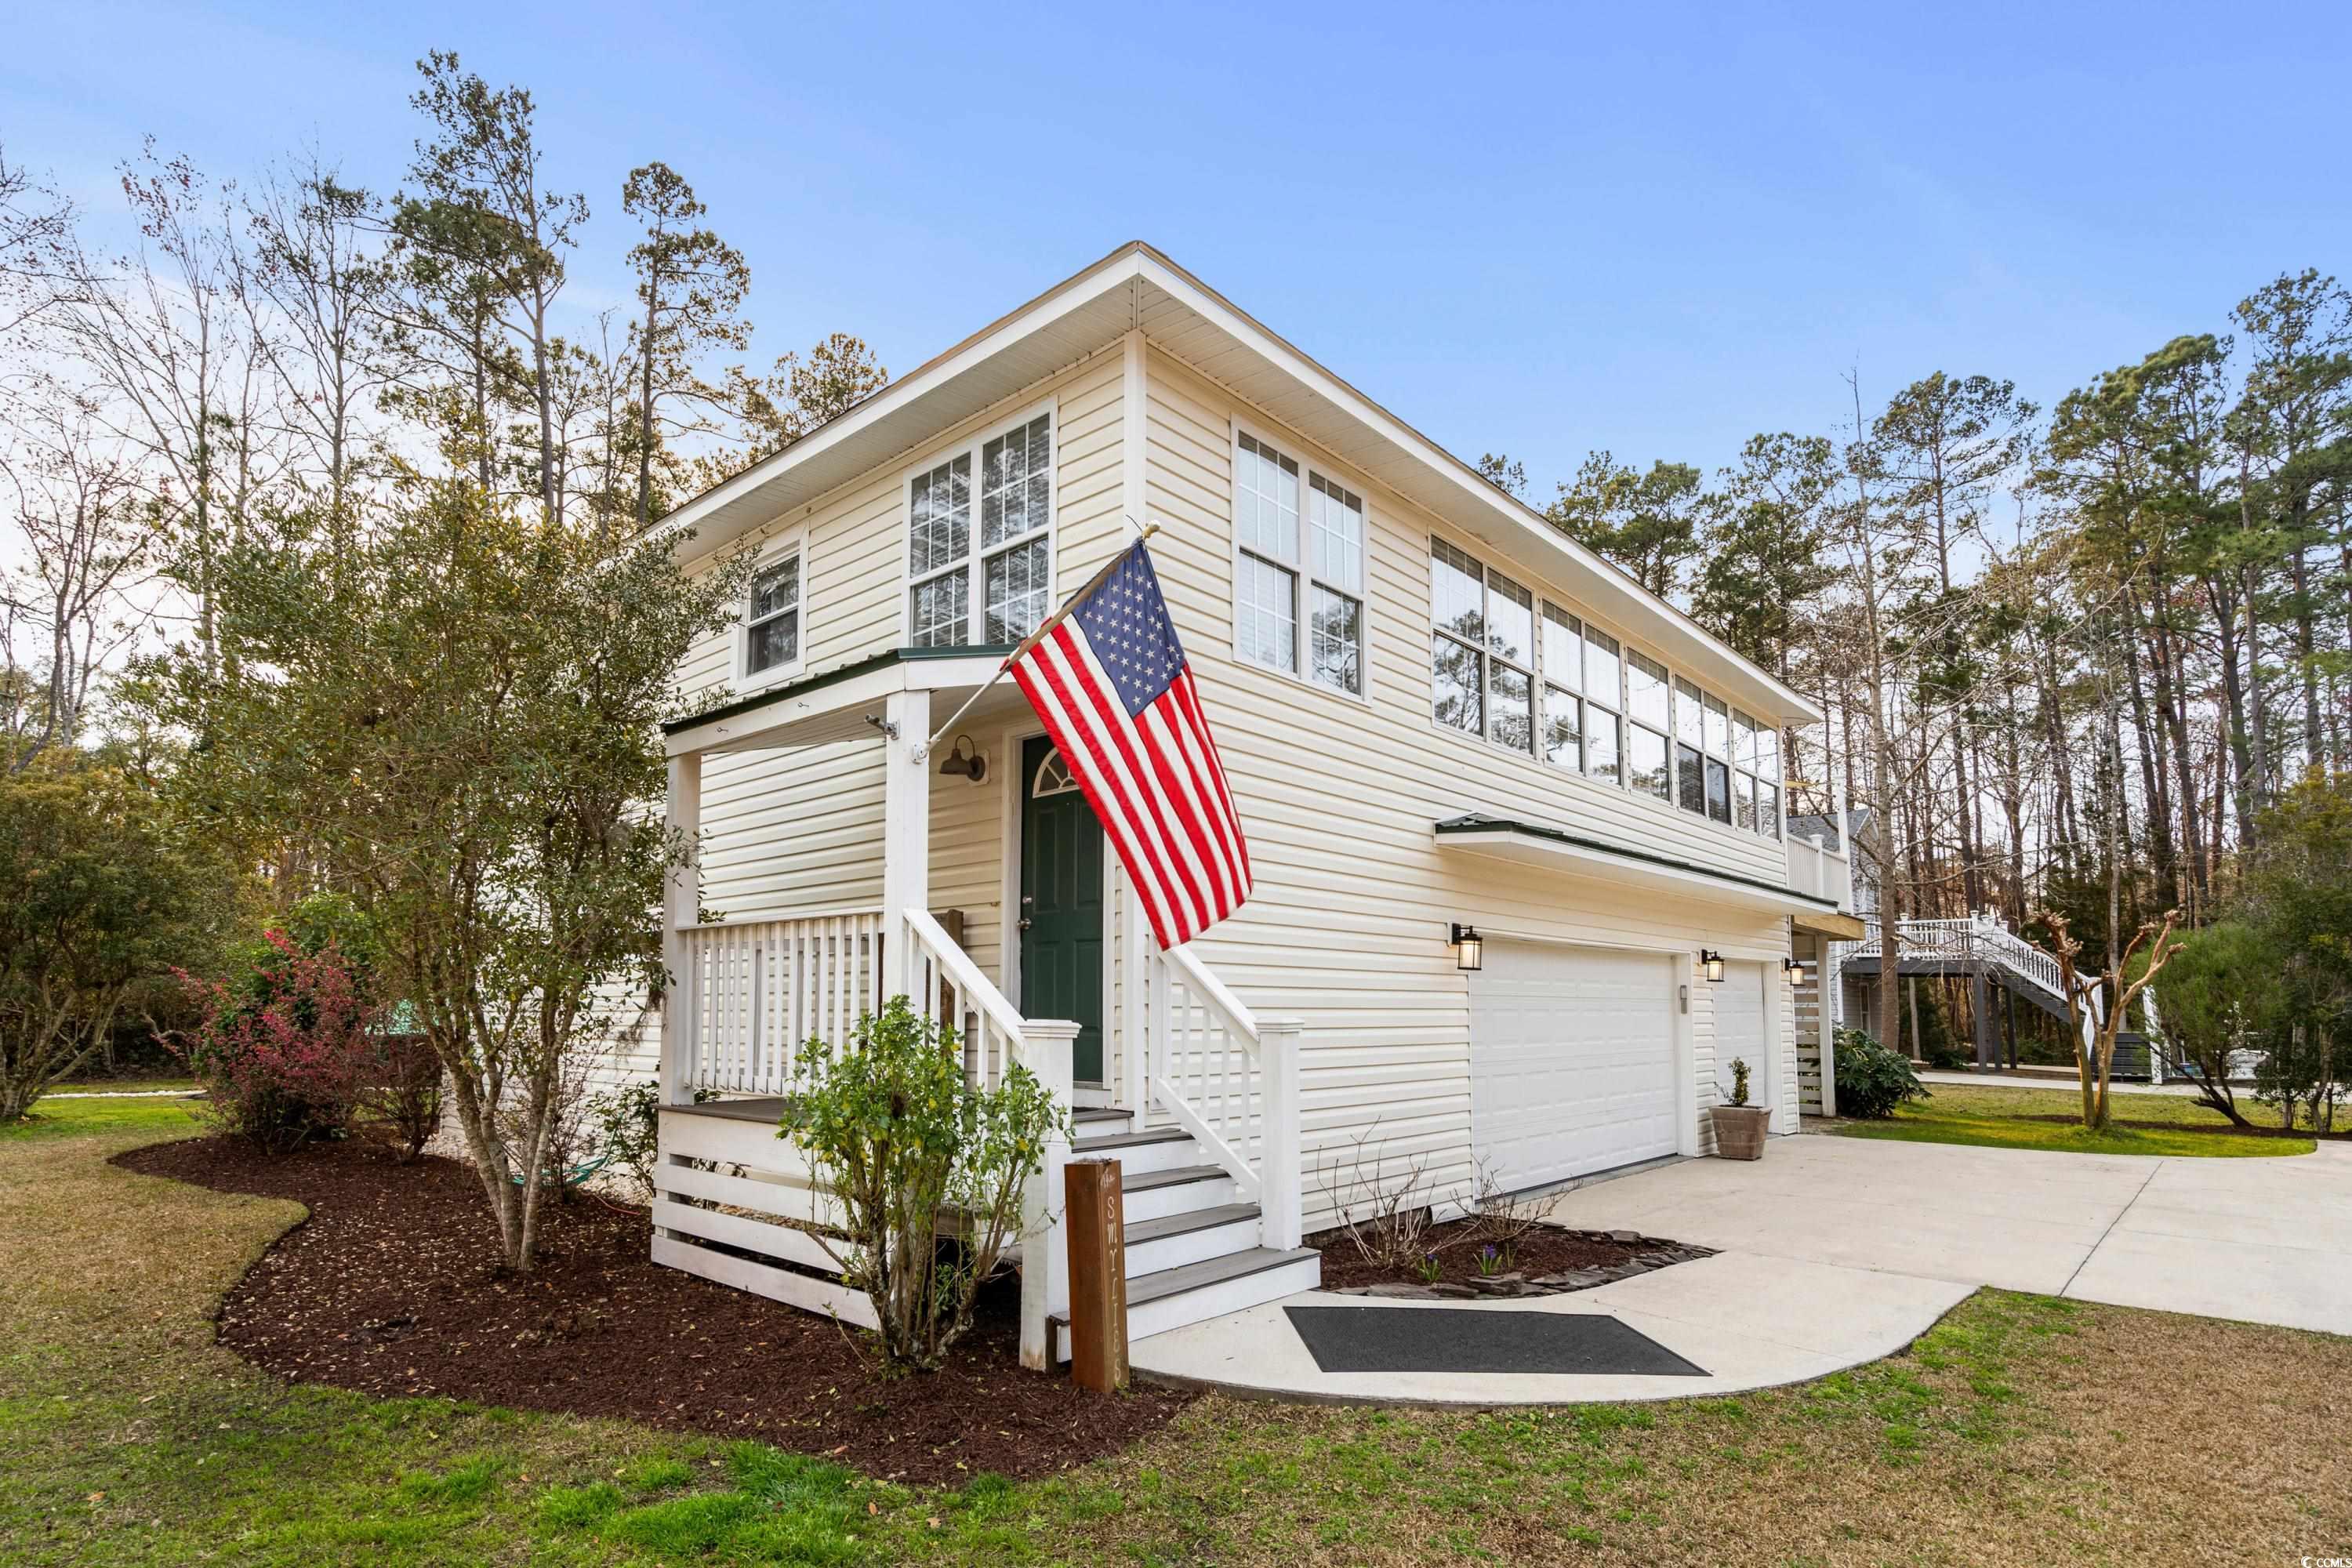 this coastal retreat offers features designed for an active yet relaxed lifestyle. this residence boasts 4 bedrooms and 3 full baths, complete with walk-in closets and an inviting low soaking tub along with a walk-in shower. the 4th bedroom is currently used as a den/family room, which could be a potential for a mother-in-law suite on the main floor. the property includes a 3-car garage and a carport, providing ample space for rv or boat/kayak storage.  inside, you'll find a spacious and open floor plan with a gleaming wood floor on the first level, complemented by tile in the bathrooms. the kitchen has been recently upgraded with granite countertops, a beautiful tile backsplash, and stainless steel appliances. enjoy abundant natural light streaming through numerous windows, creating a warm and welcoming atmosphere. outside, an expansive deck awaits for grilling and entertaining, overlooking a semi-fenced backyard with raised gardens, attractive landscaping.  the property also features a concrete pad patio with a grill and sitting area. situated in the desirable hagley estates, this home offers a secluded coastal lifestyle with swift access to the intracoastal waterway. whether you seek permanent residency or a vacation home, this community embodies the serene charm of the south carolina lowcountry. with a voluntary hoa, a convenient boat landing, and proximity to the beach and golf courses, take pride in calling this meticulously maintained property your home.